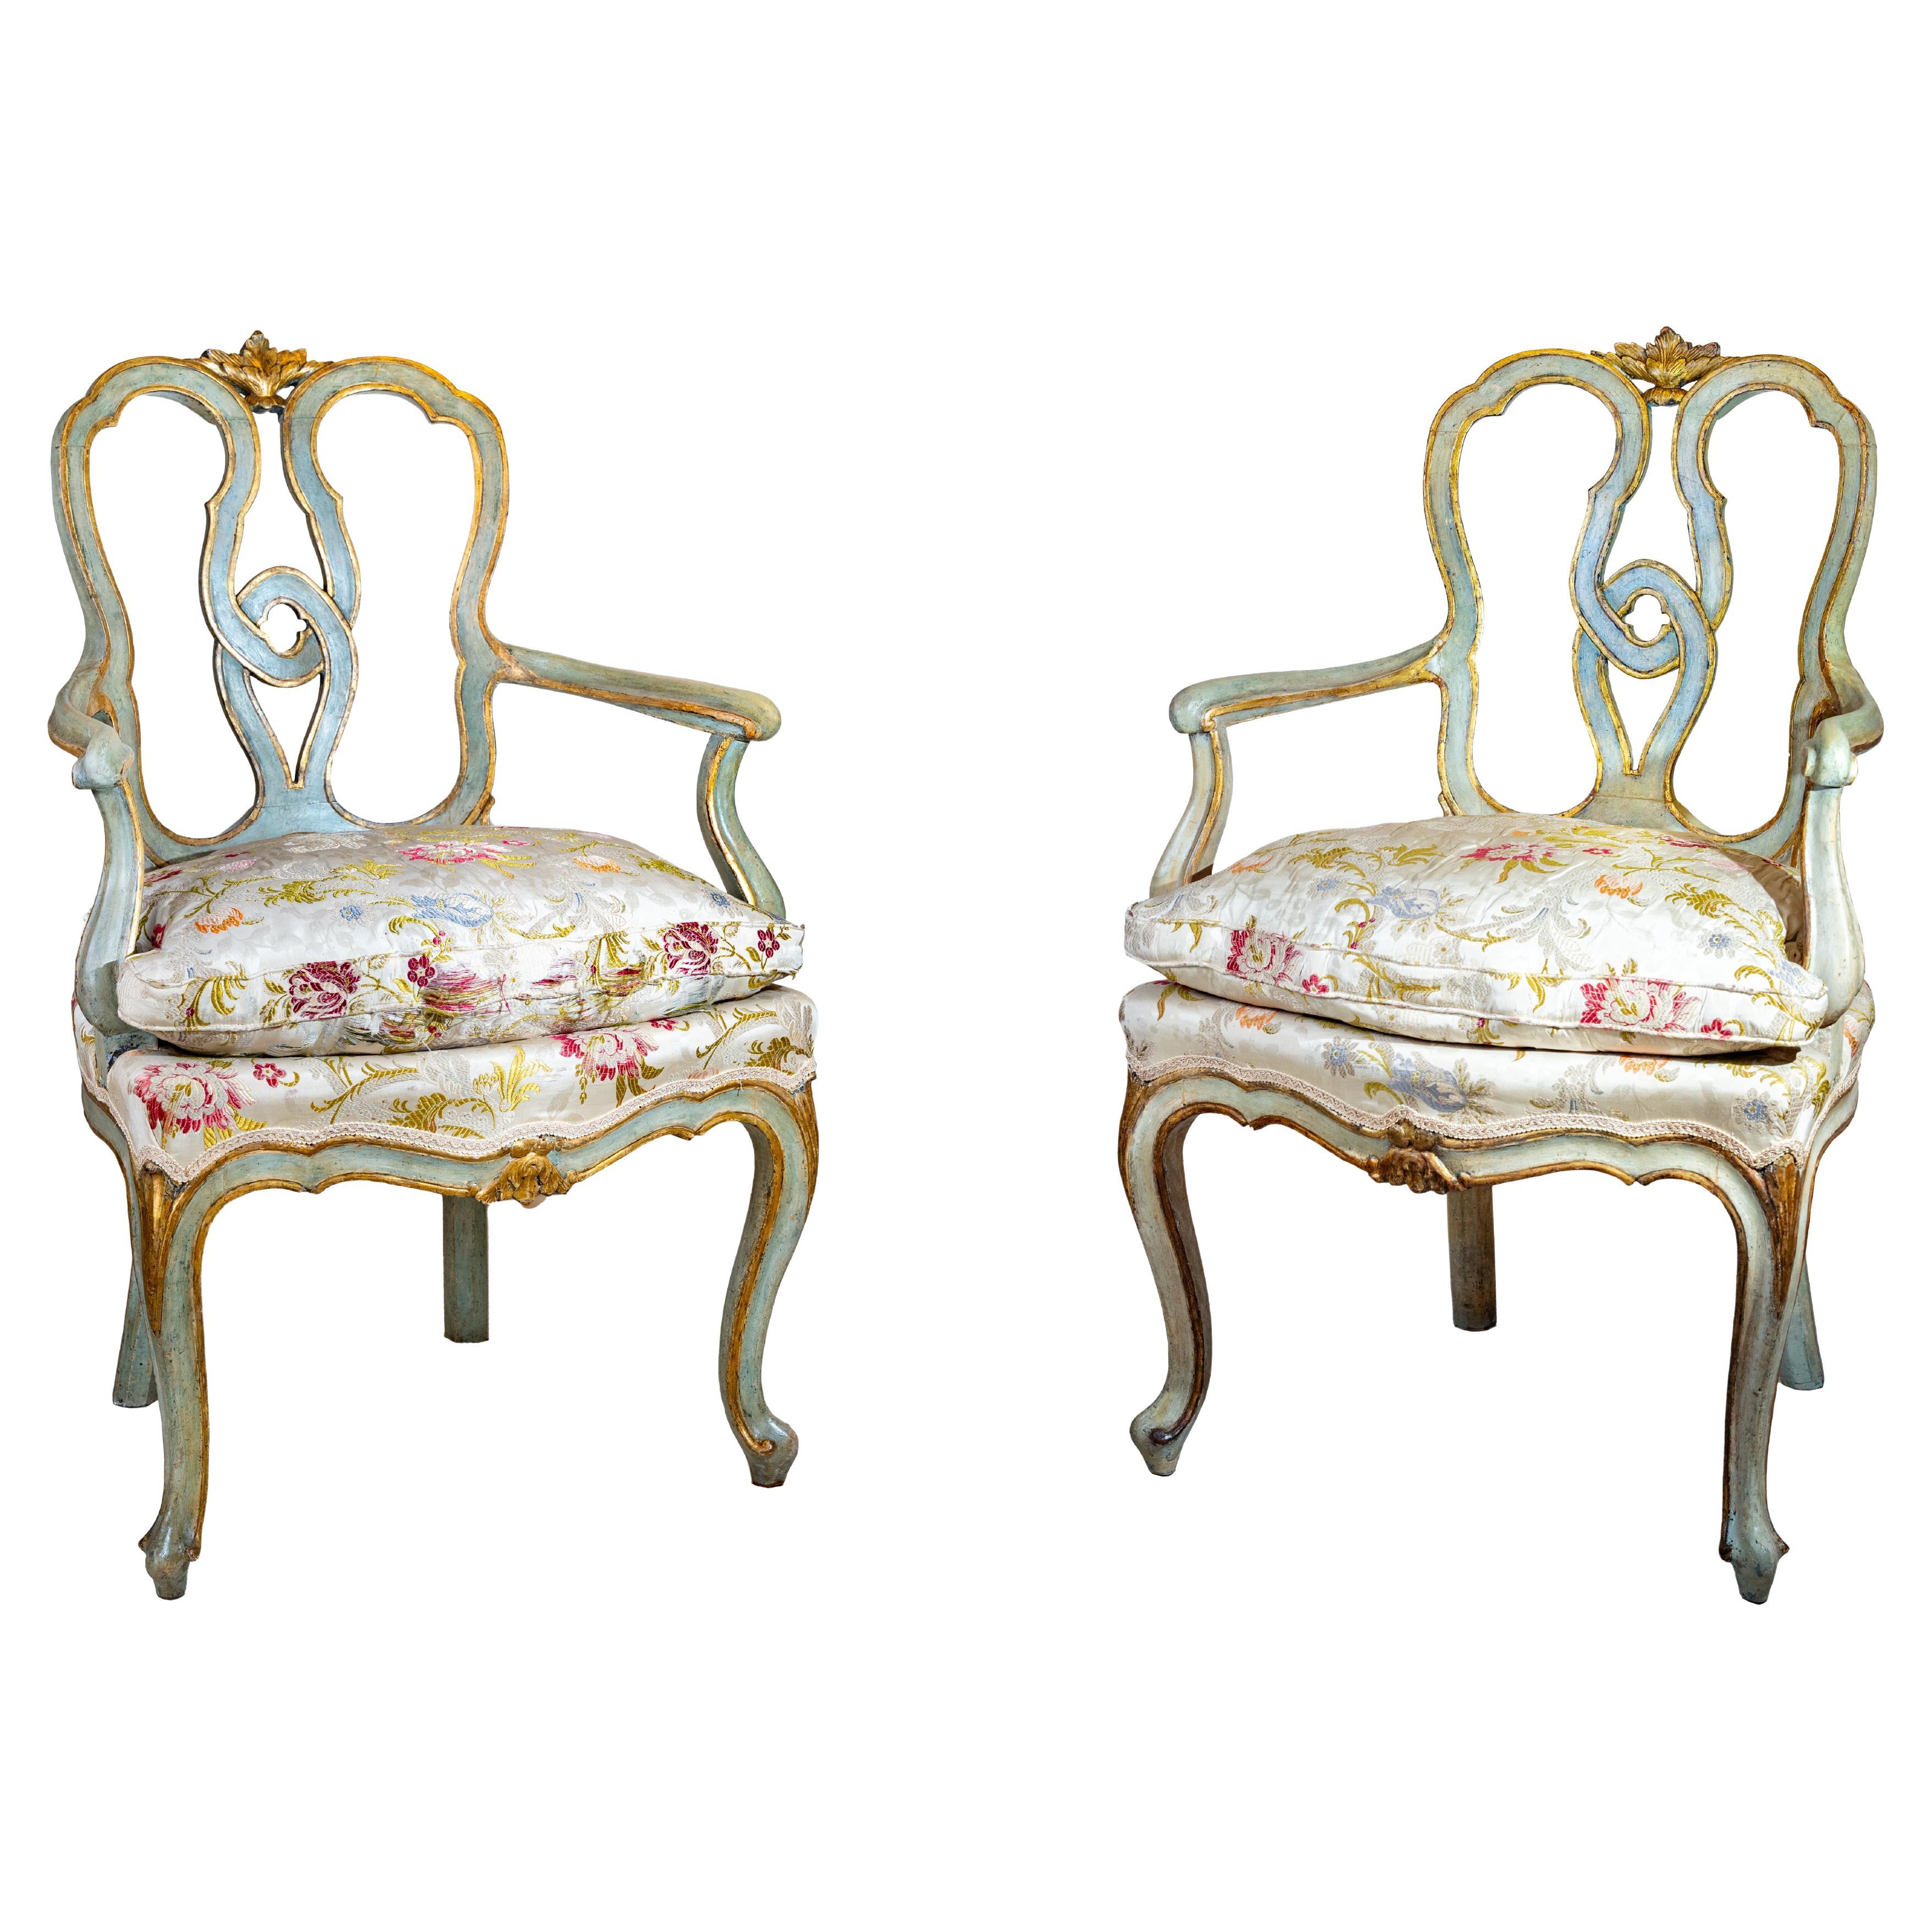 Pair of Venetian armchairs in lacquered and gilded wood, 18th century For Sale